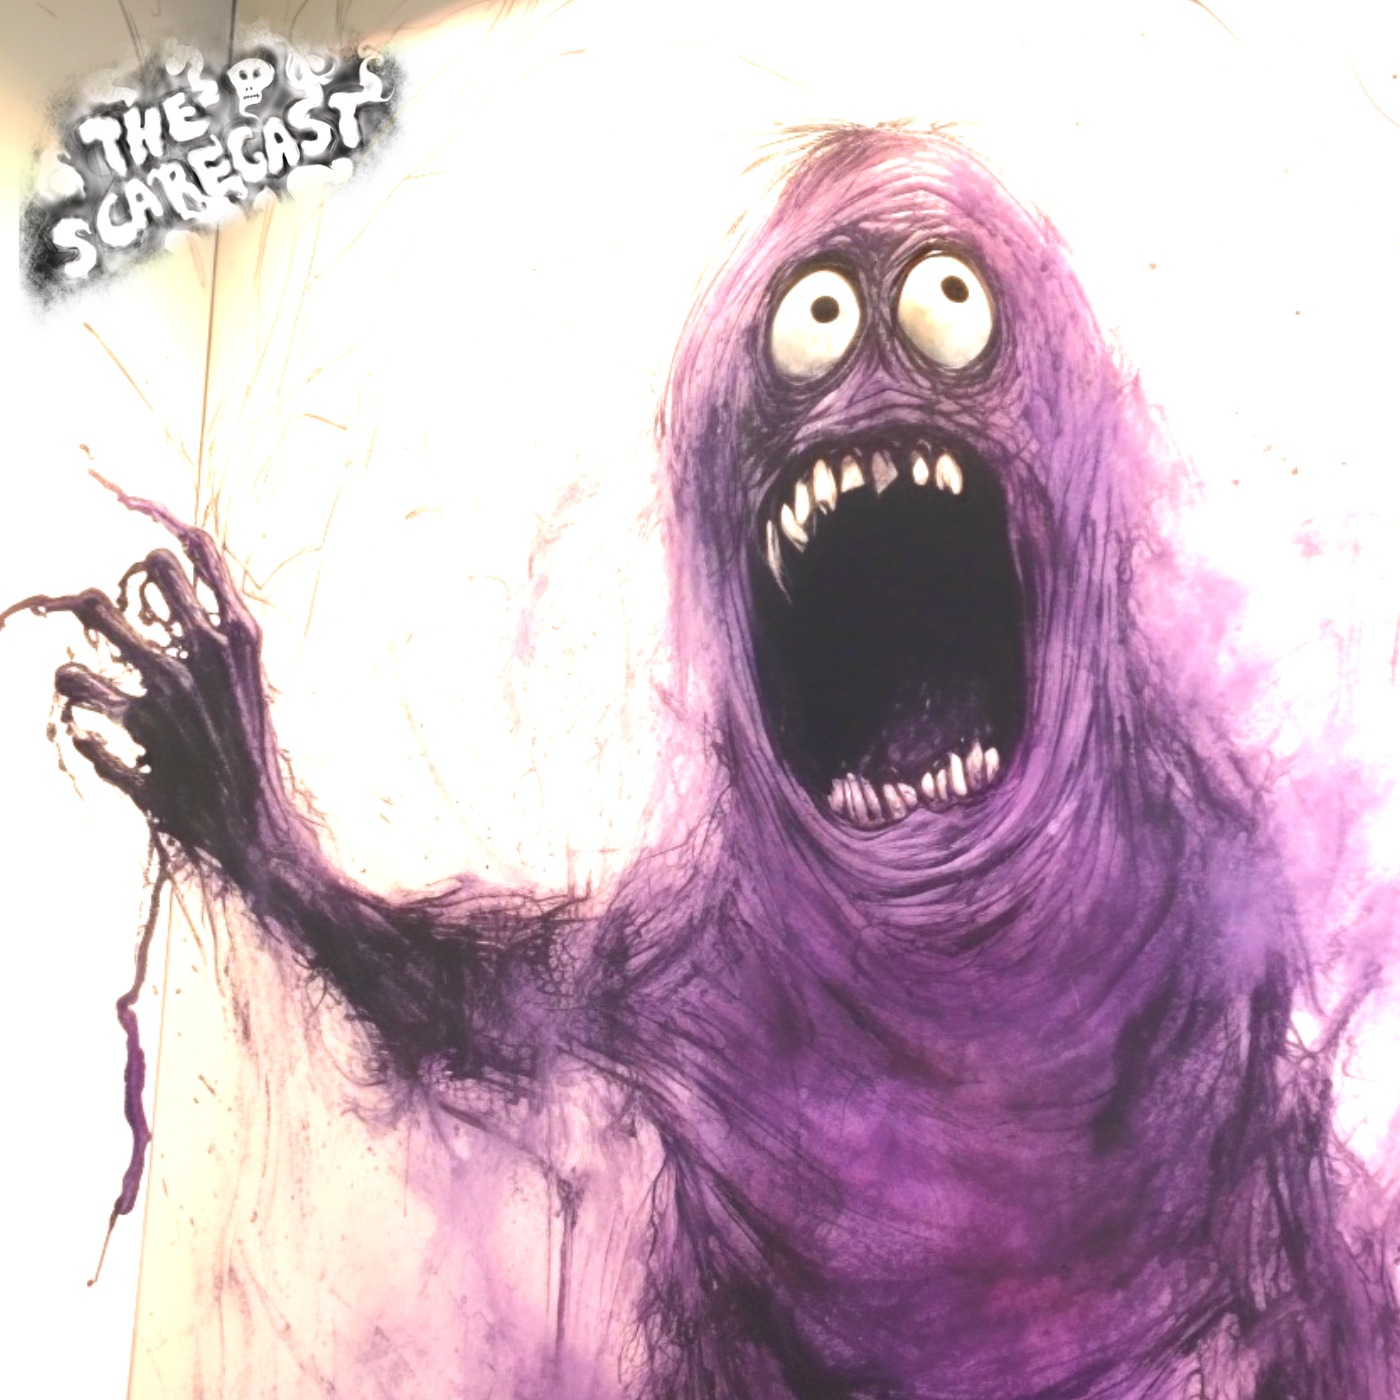 Bedtime Story #24: Don't You Miss The Grimace Shake?